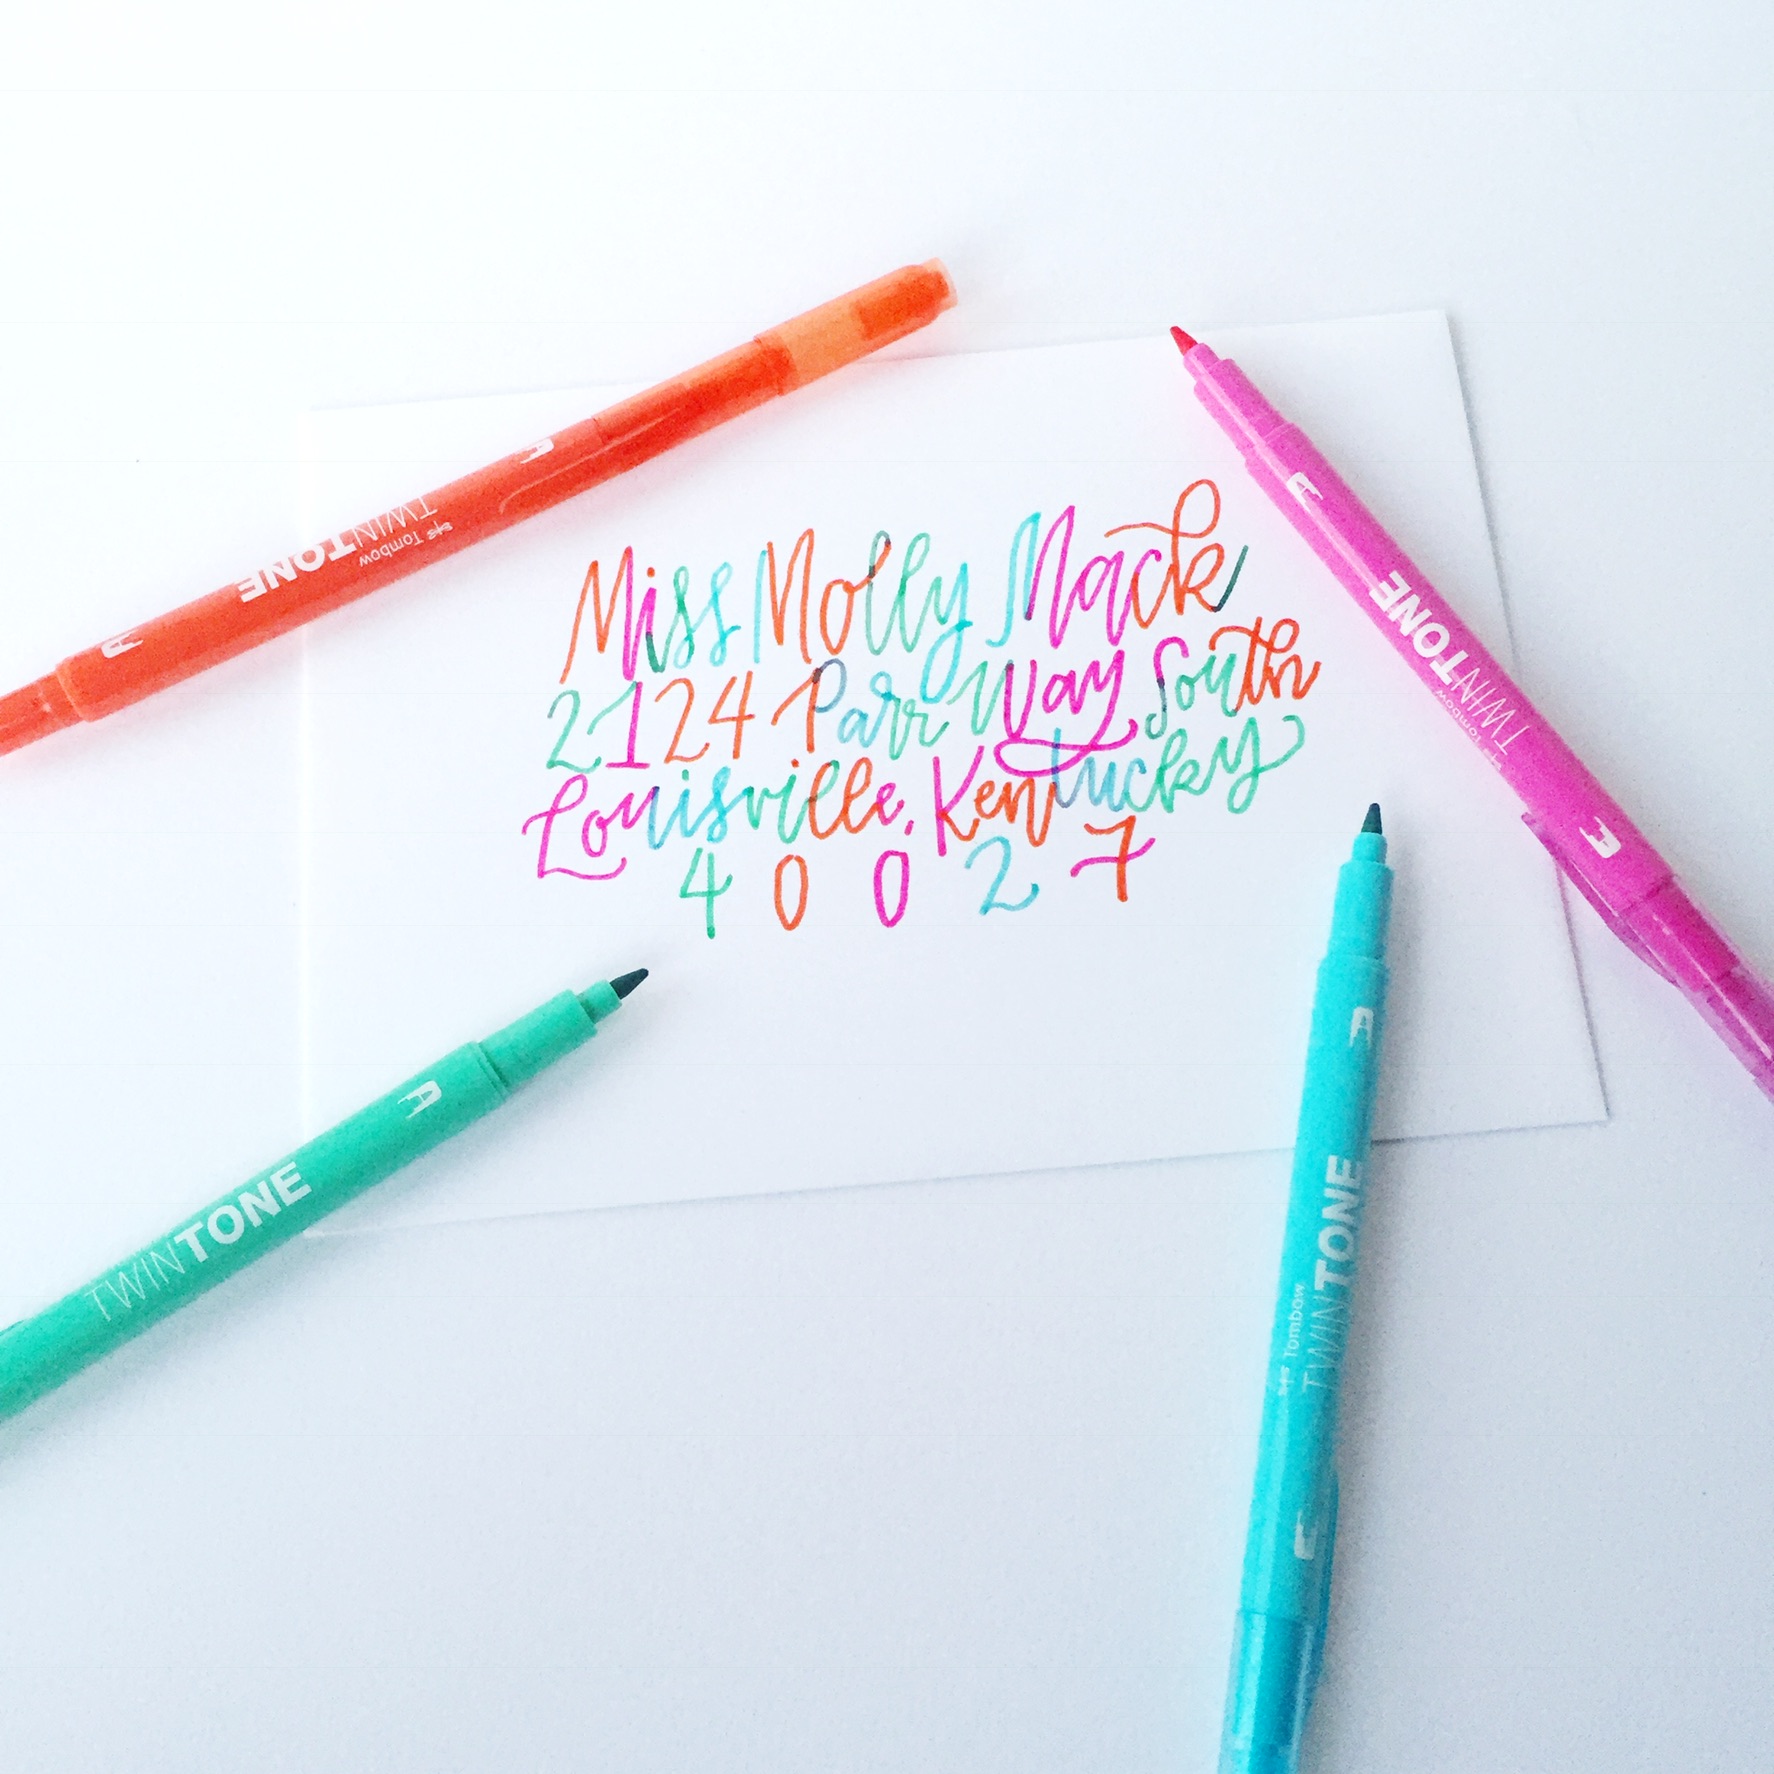 Lauren Fitzmaurice of @renmadecalligraphy teaches you 10 Happy Mail Hacks to use with your Tombow USA products! Use these tips and tricks to make a fun and creative envelope in 10 minutes or less! For more lettering tips and tricks check out renmadecalligraphy.com.